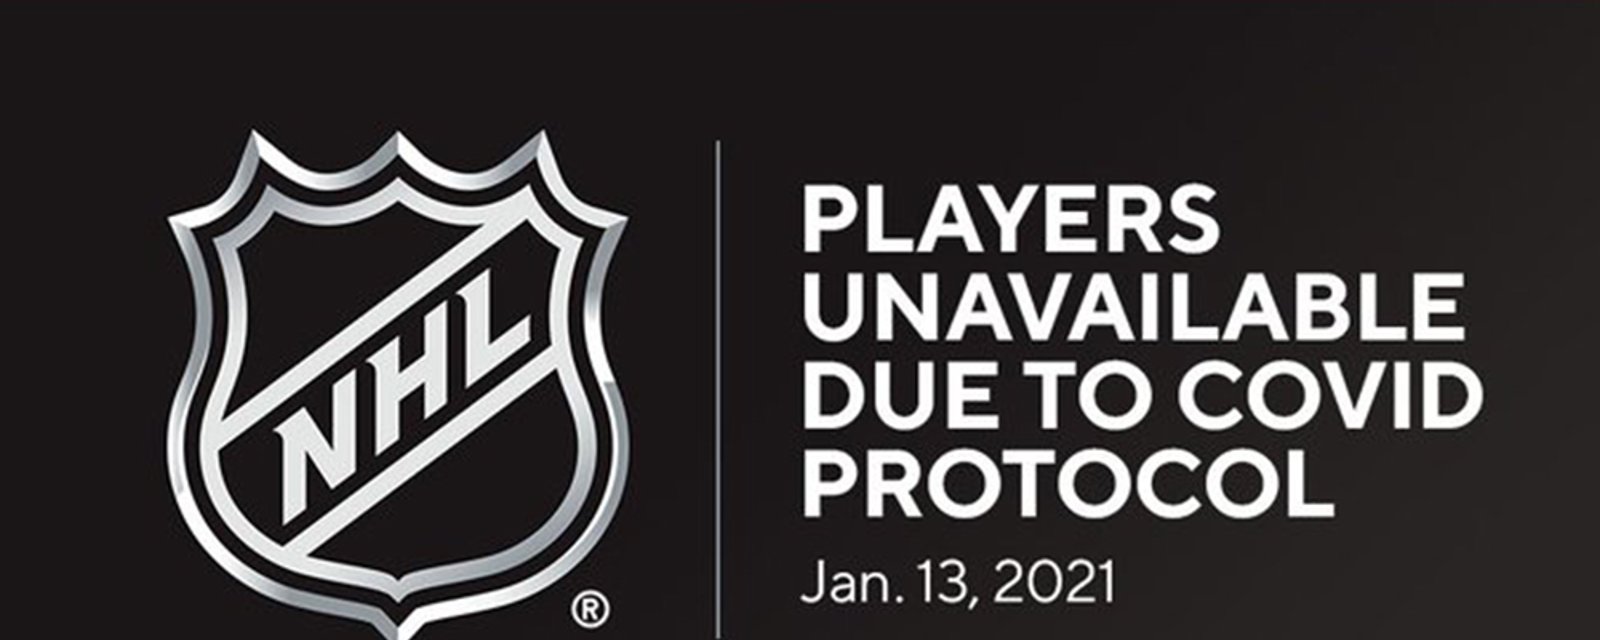 NHL releases the names of 22 players out due to protocol 